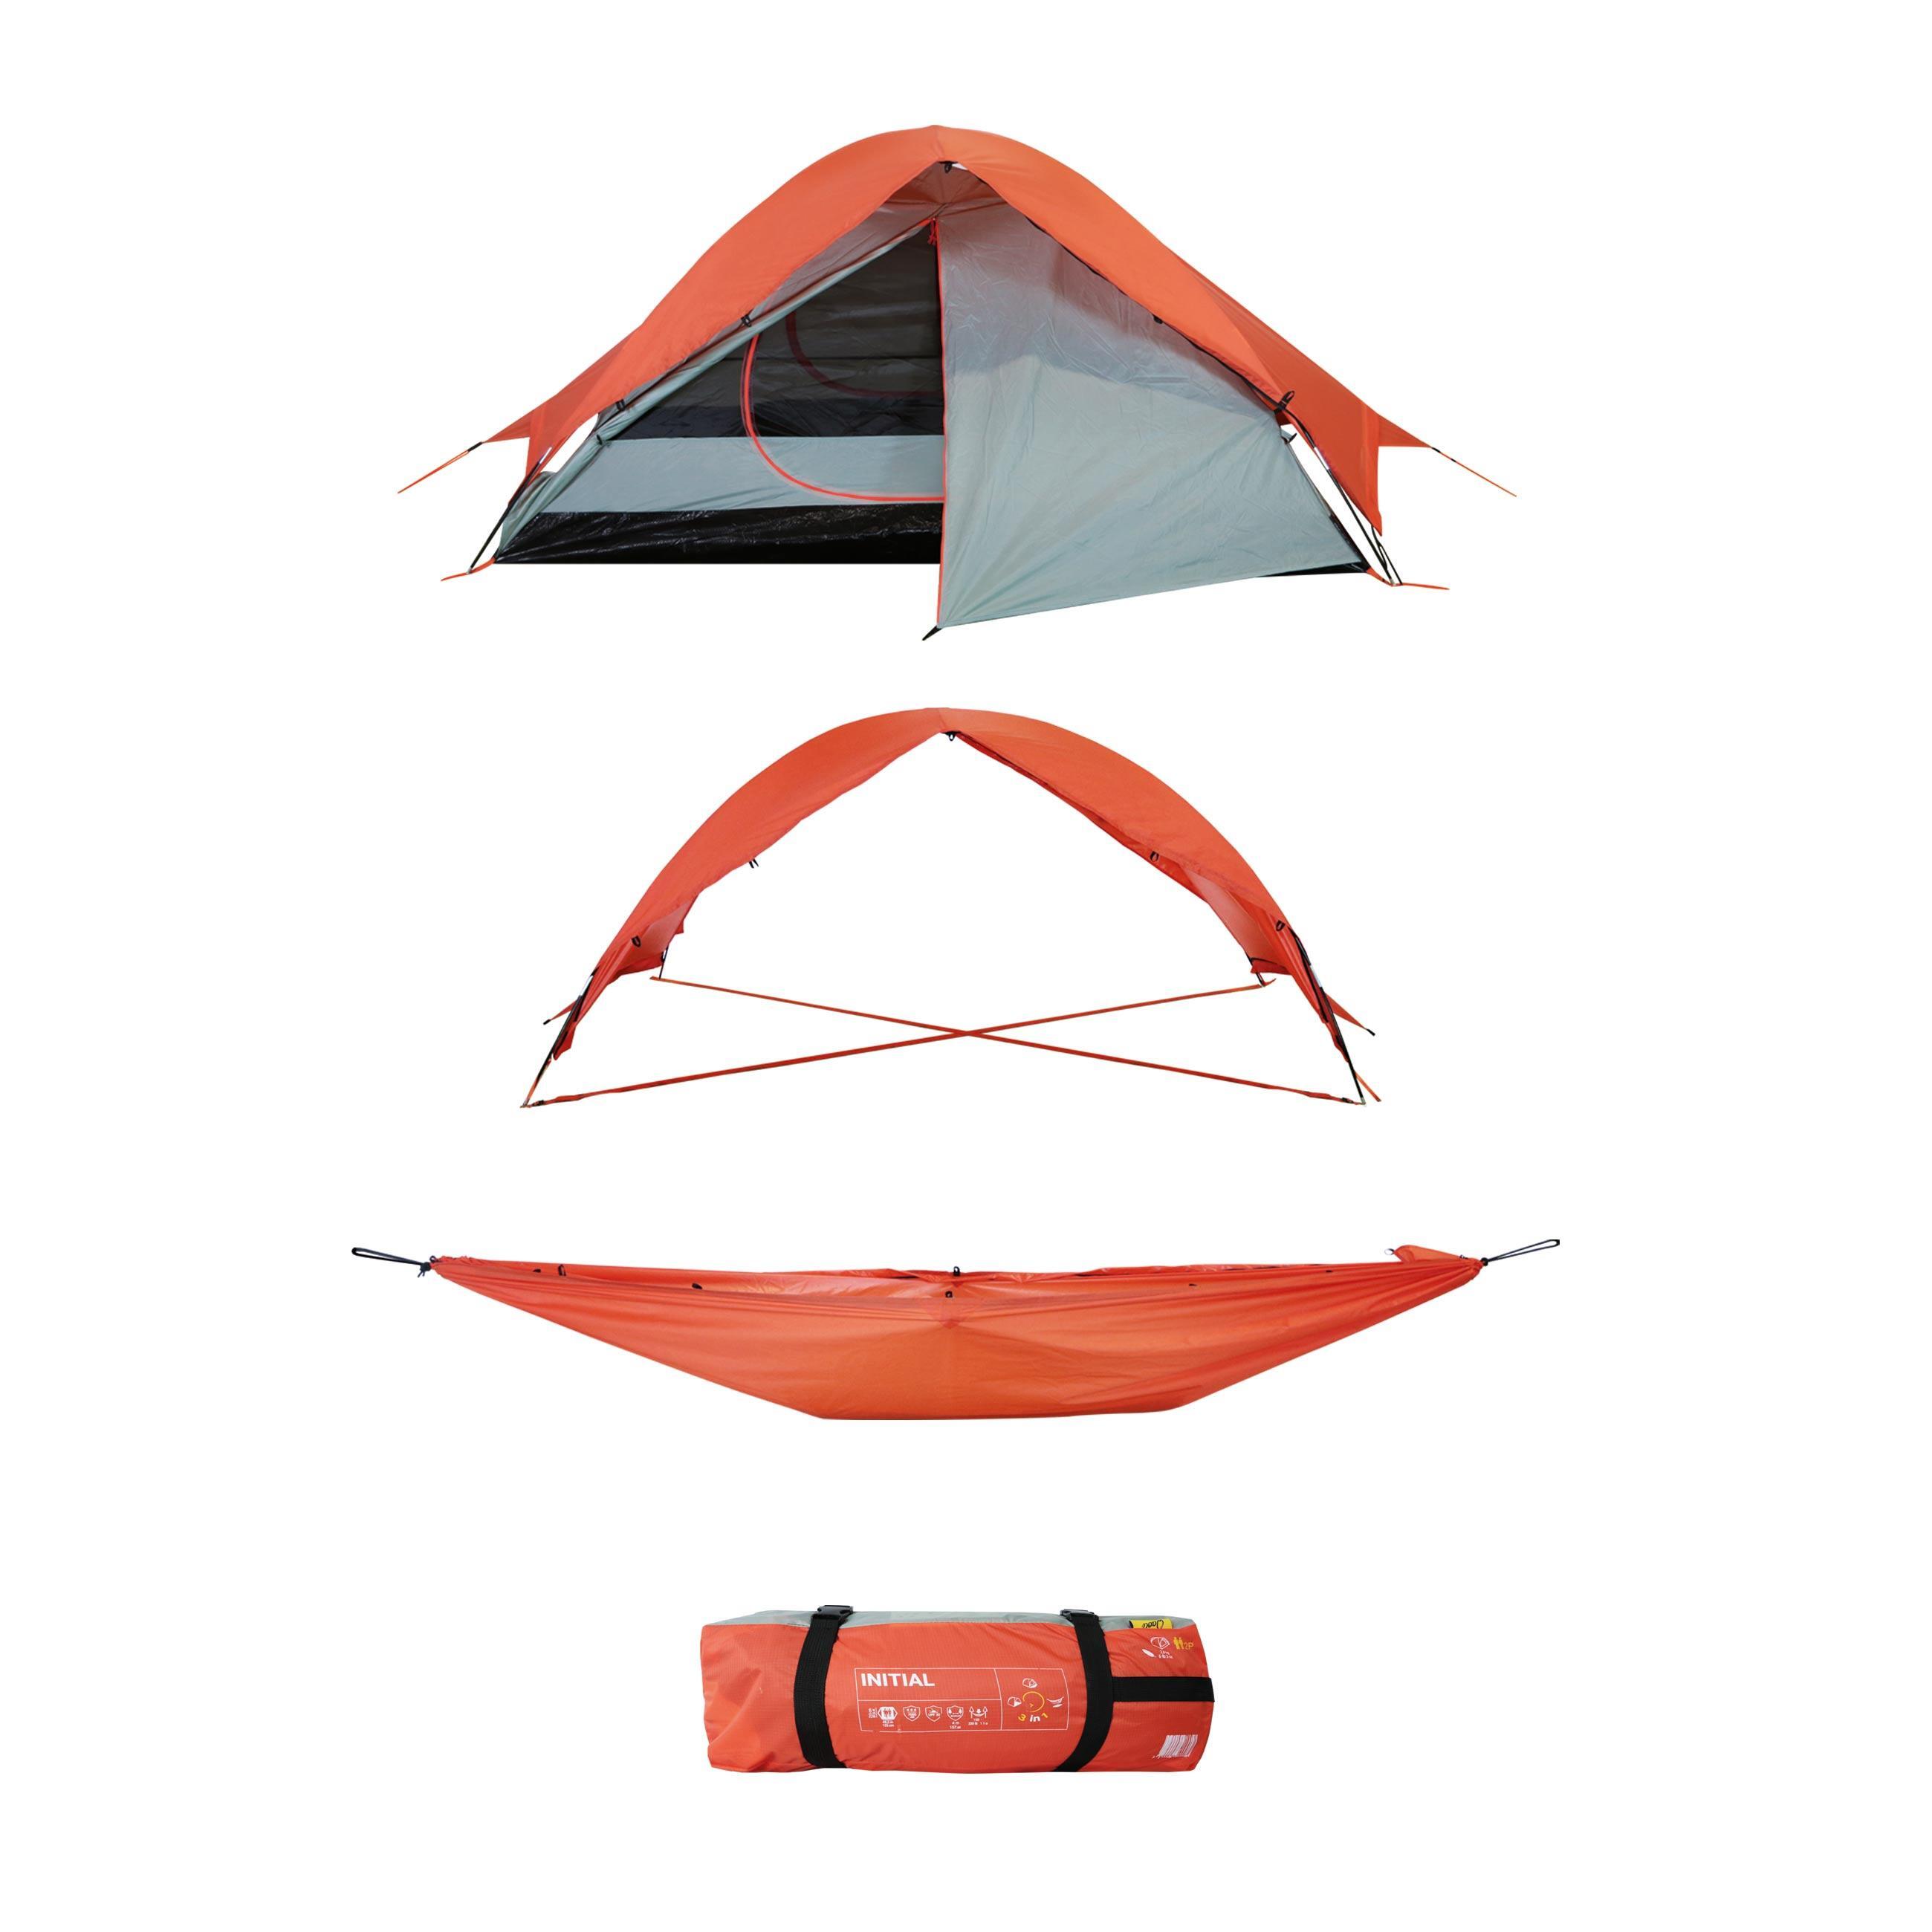 QAOU Refurbished Multifunction Two-Person Tent - B Grade